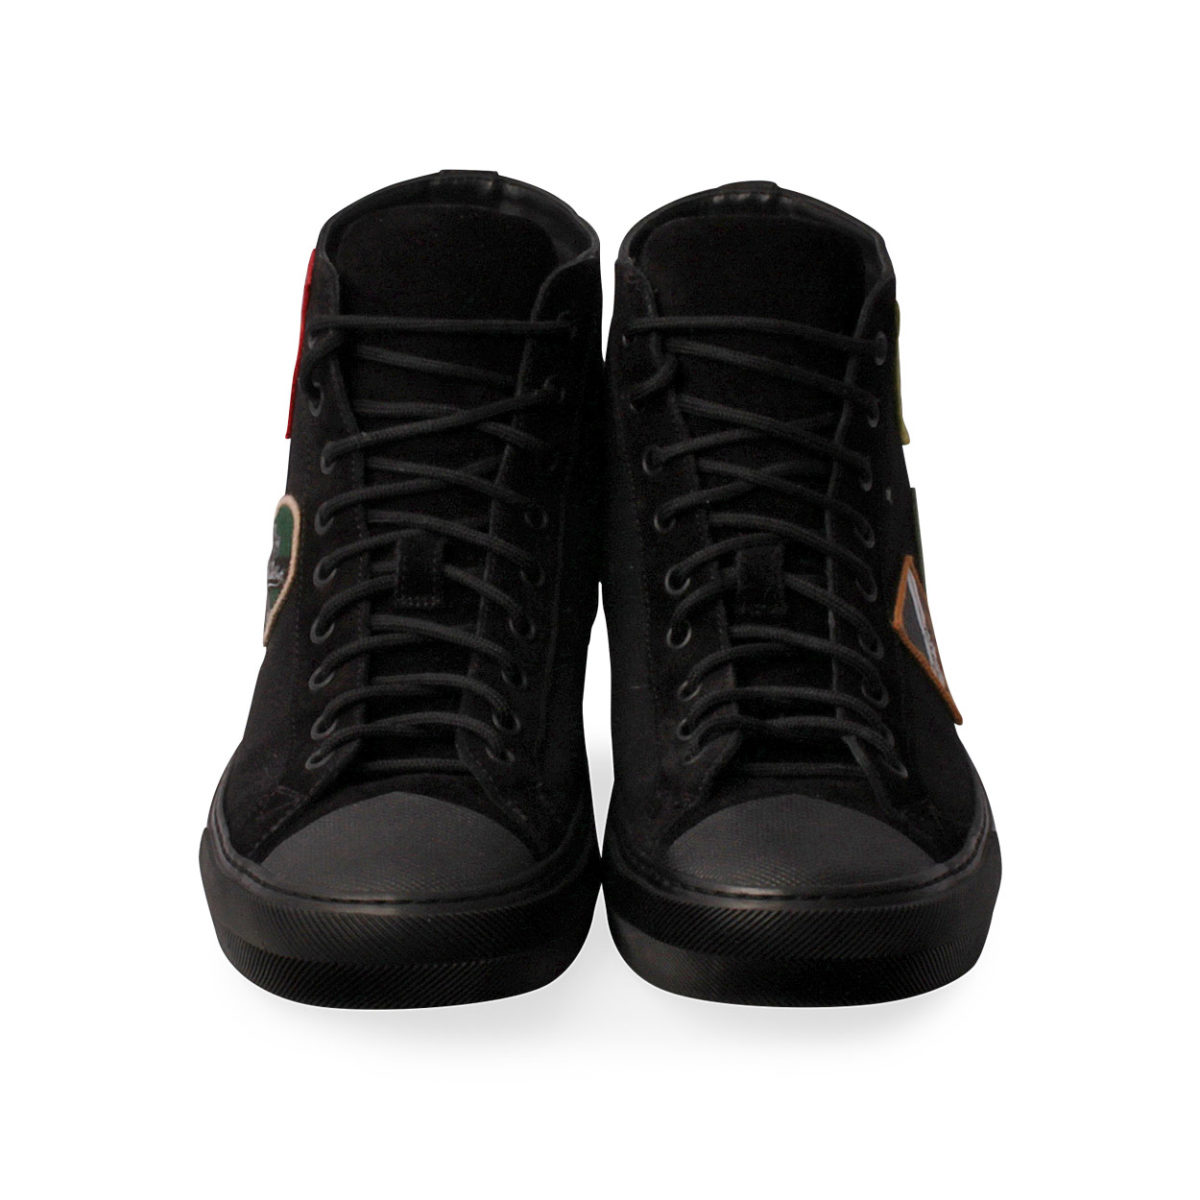 Louis Vuitton Black Leather Tattoo High Top Sneakers Size 42 at